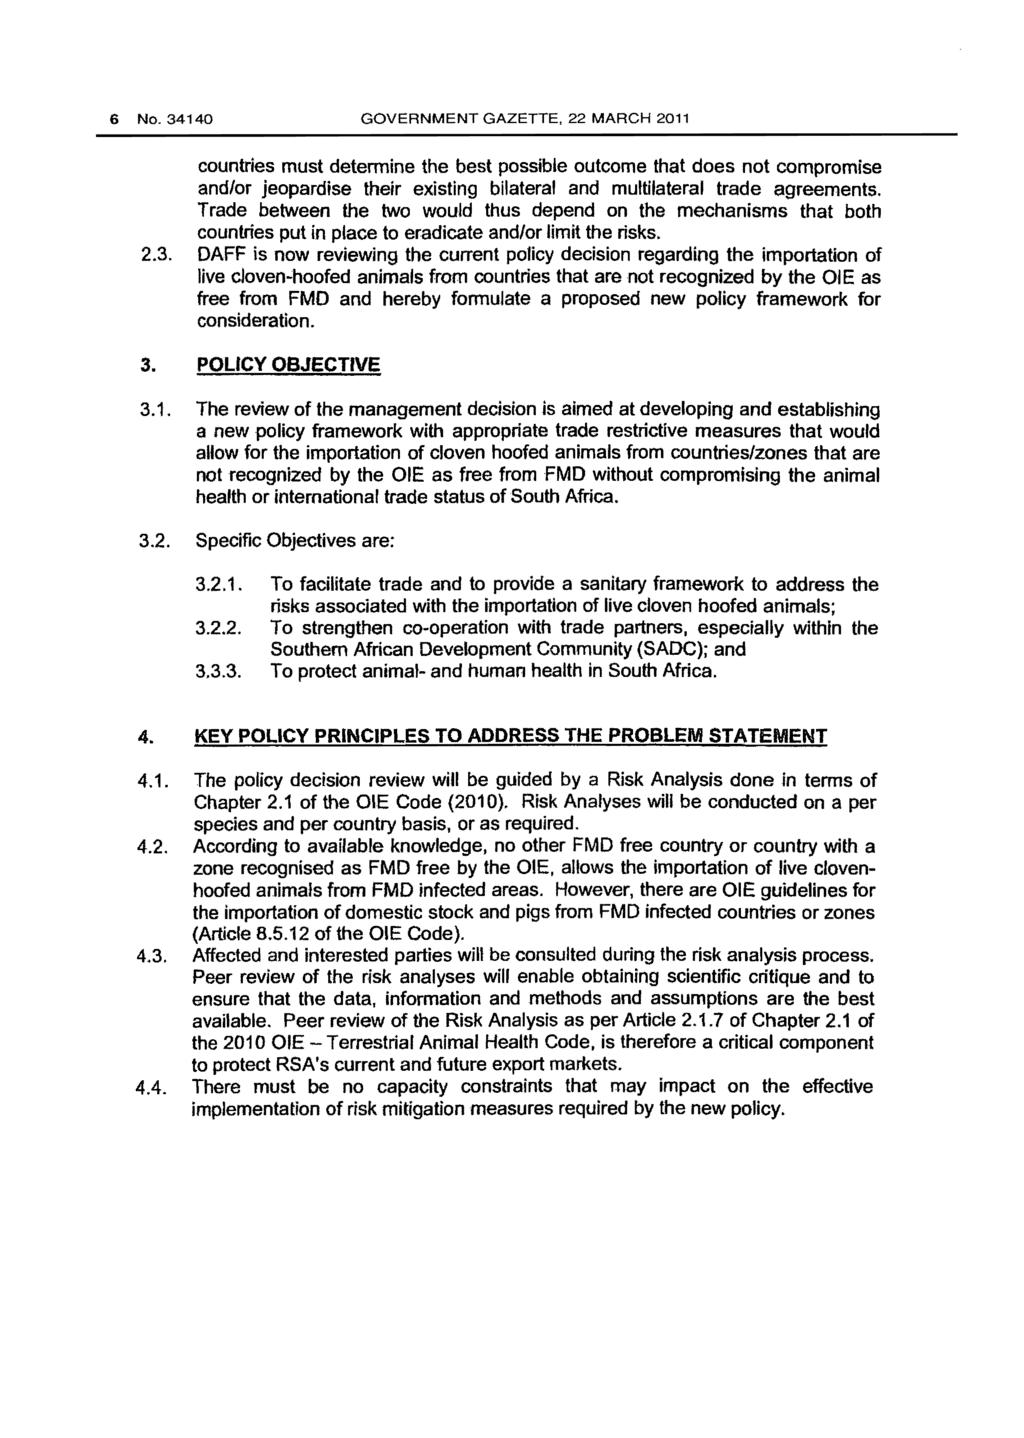 6 No.34140 GOVERNMENT GAZETTE, 22 MARCH 2011 countries must determine the best possible outcome that does not compromise and/or jeopardise their existing bilateral and multilateral trade agreements.